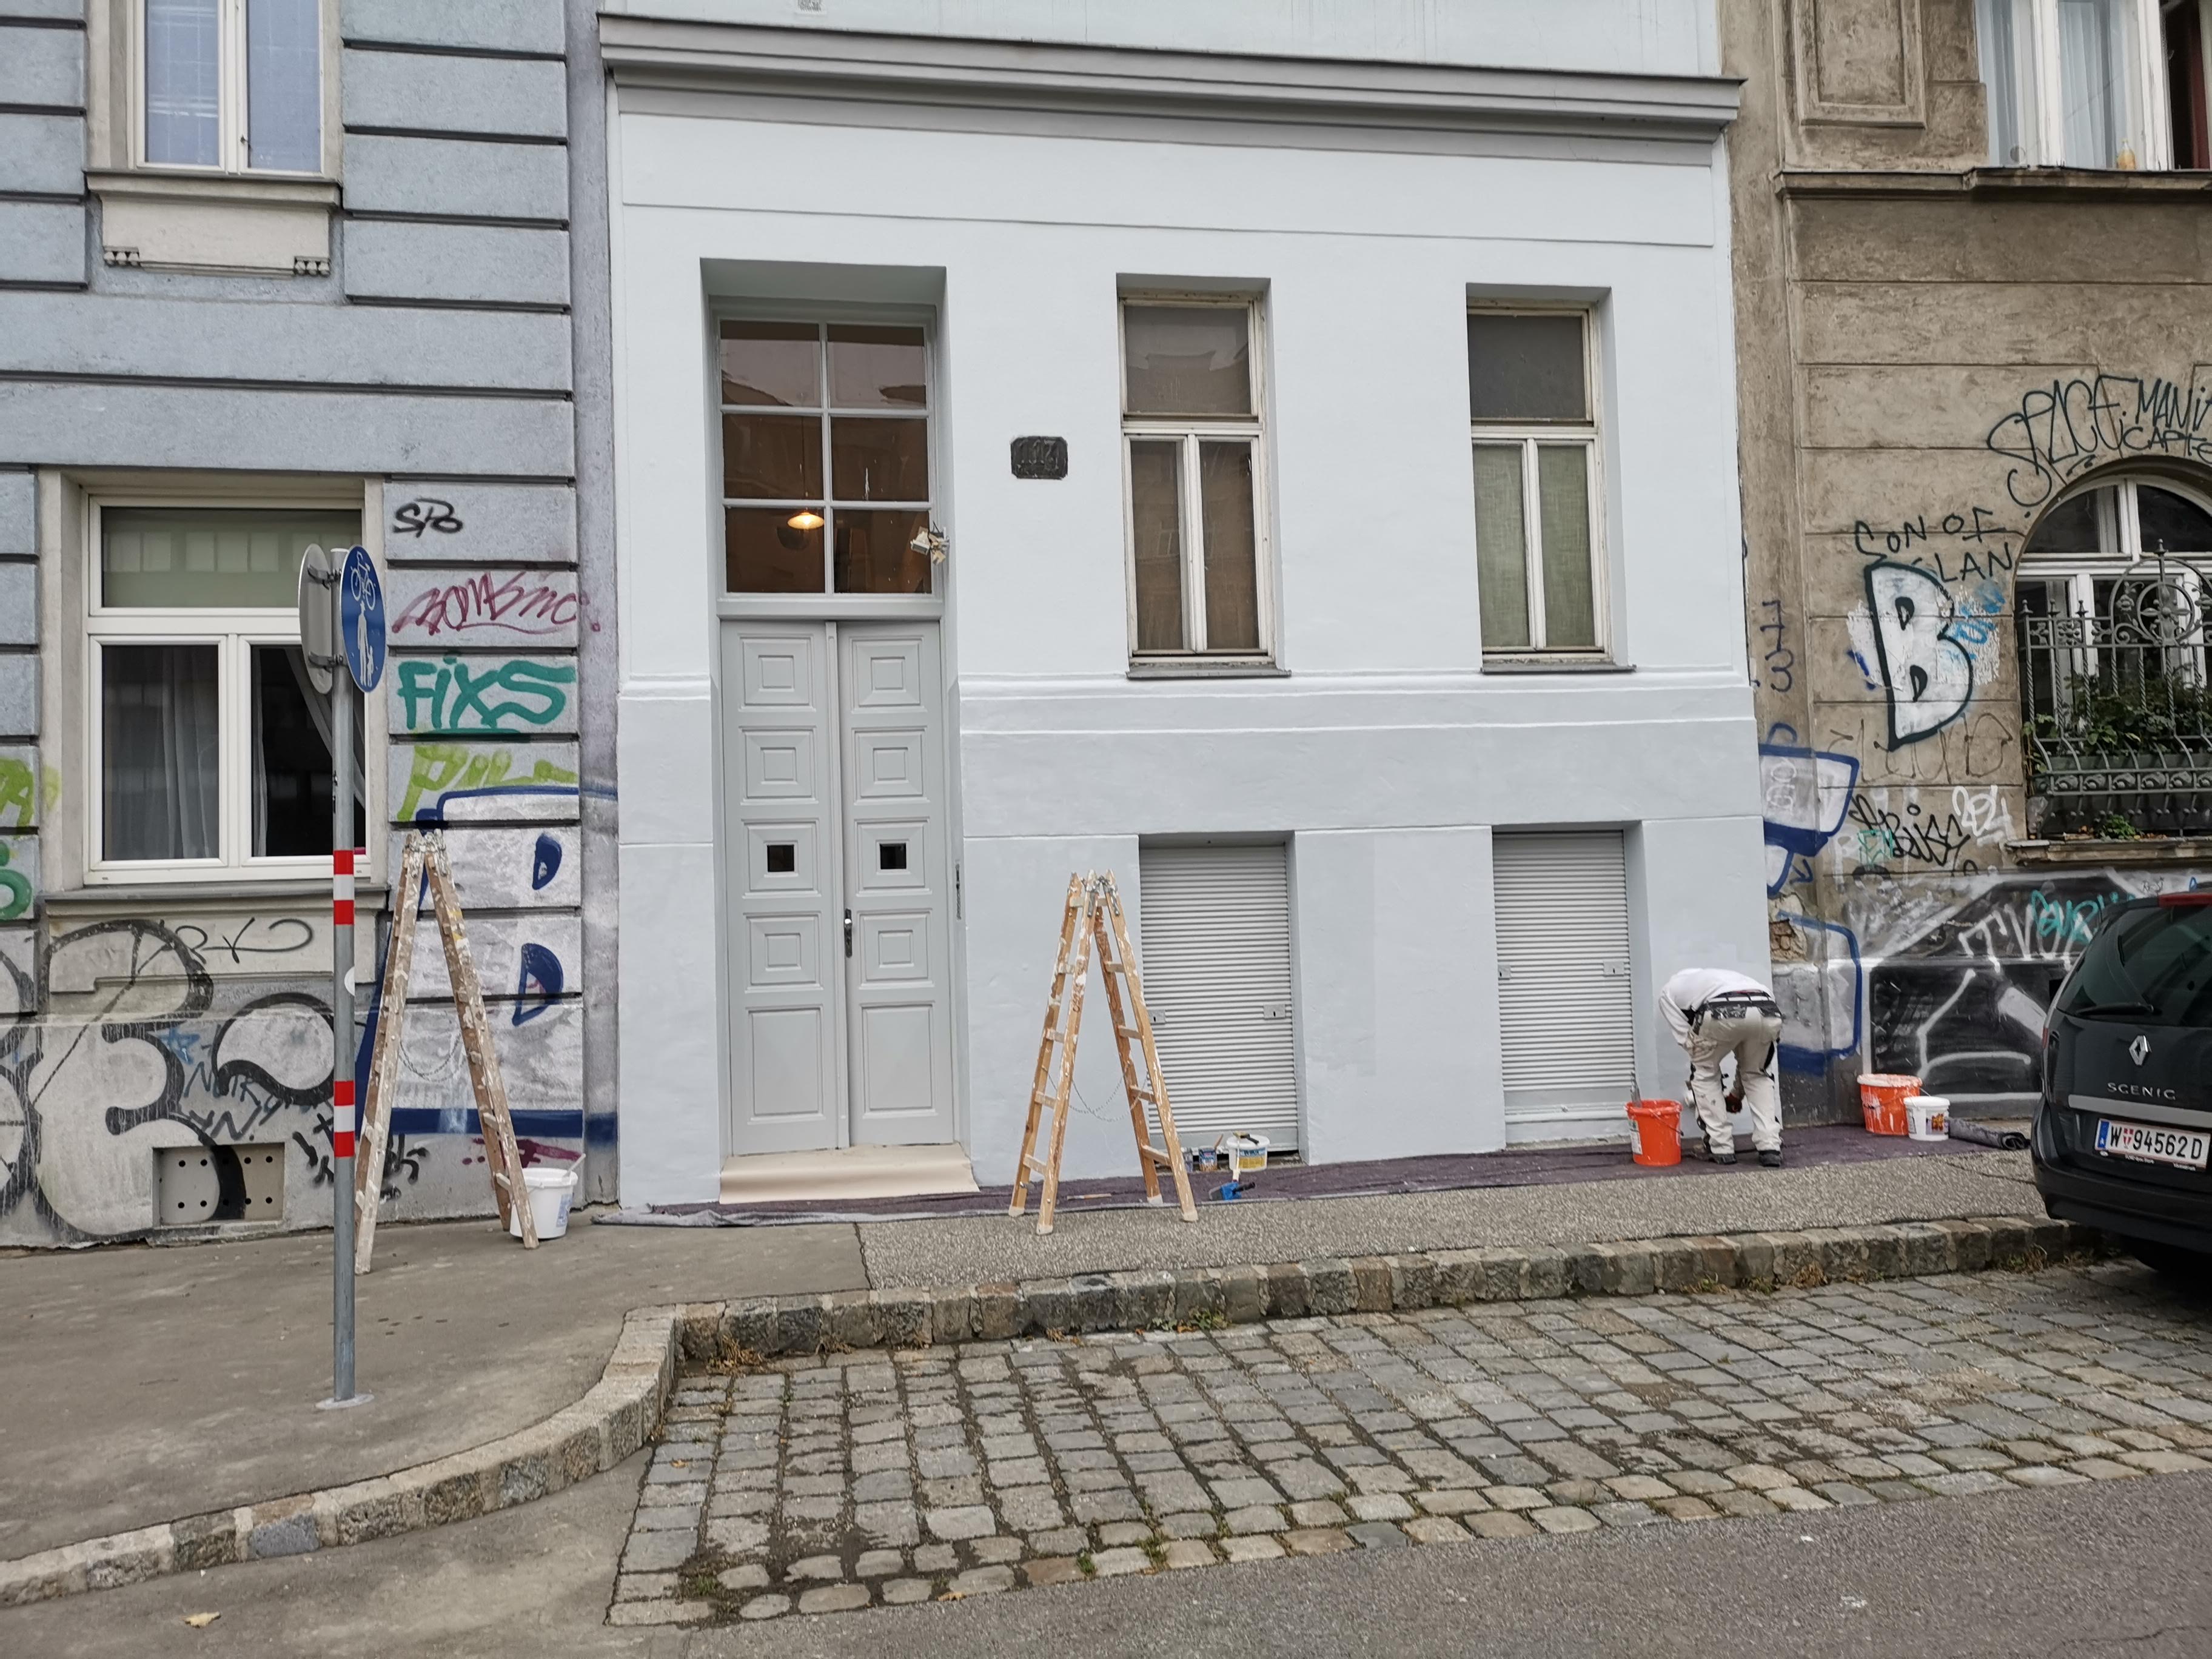 An exterior photo of the front of a grey painted building in a street. A man is at work with a paint brush